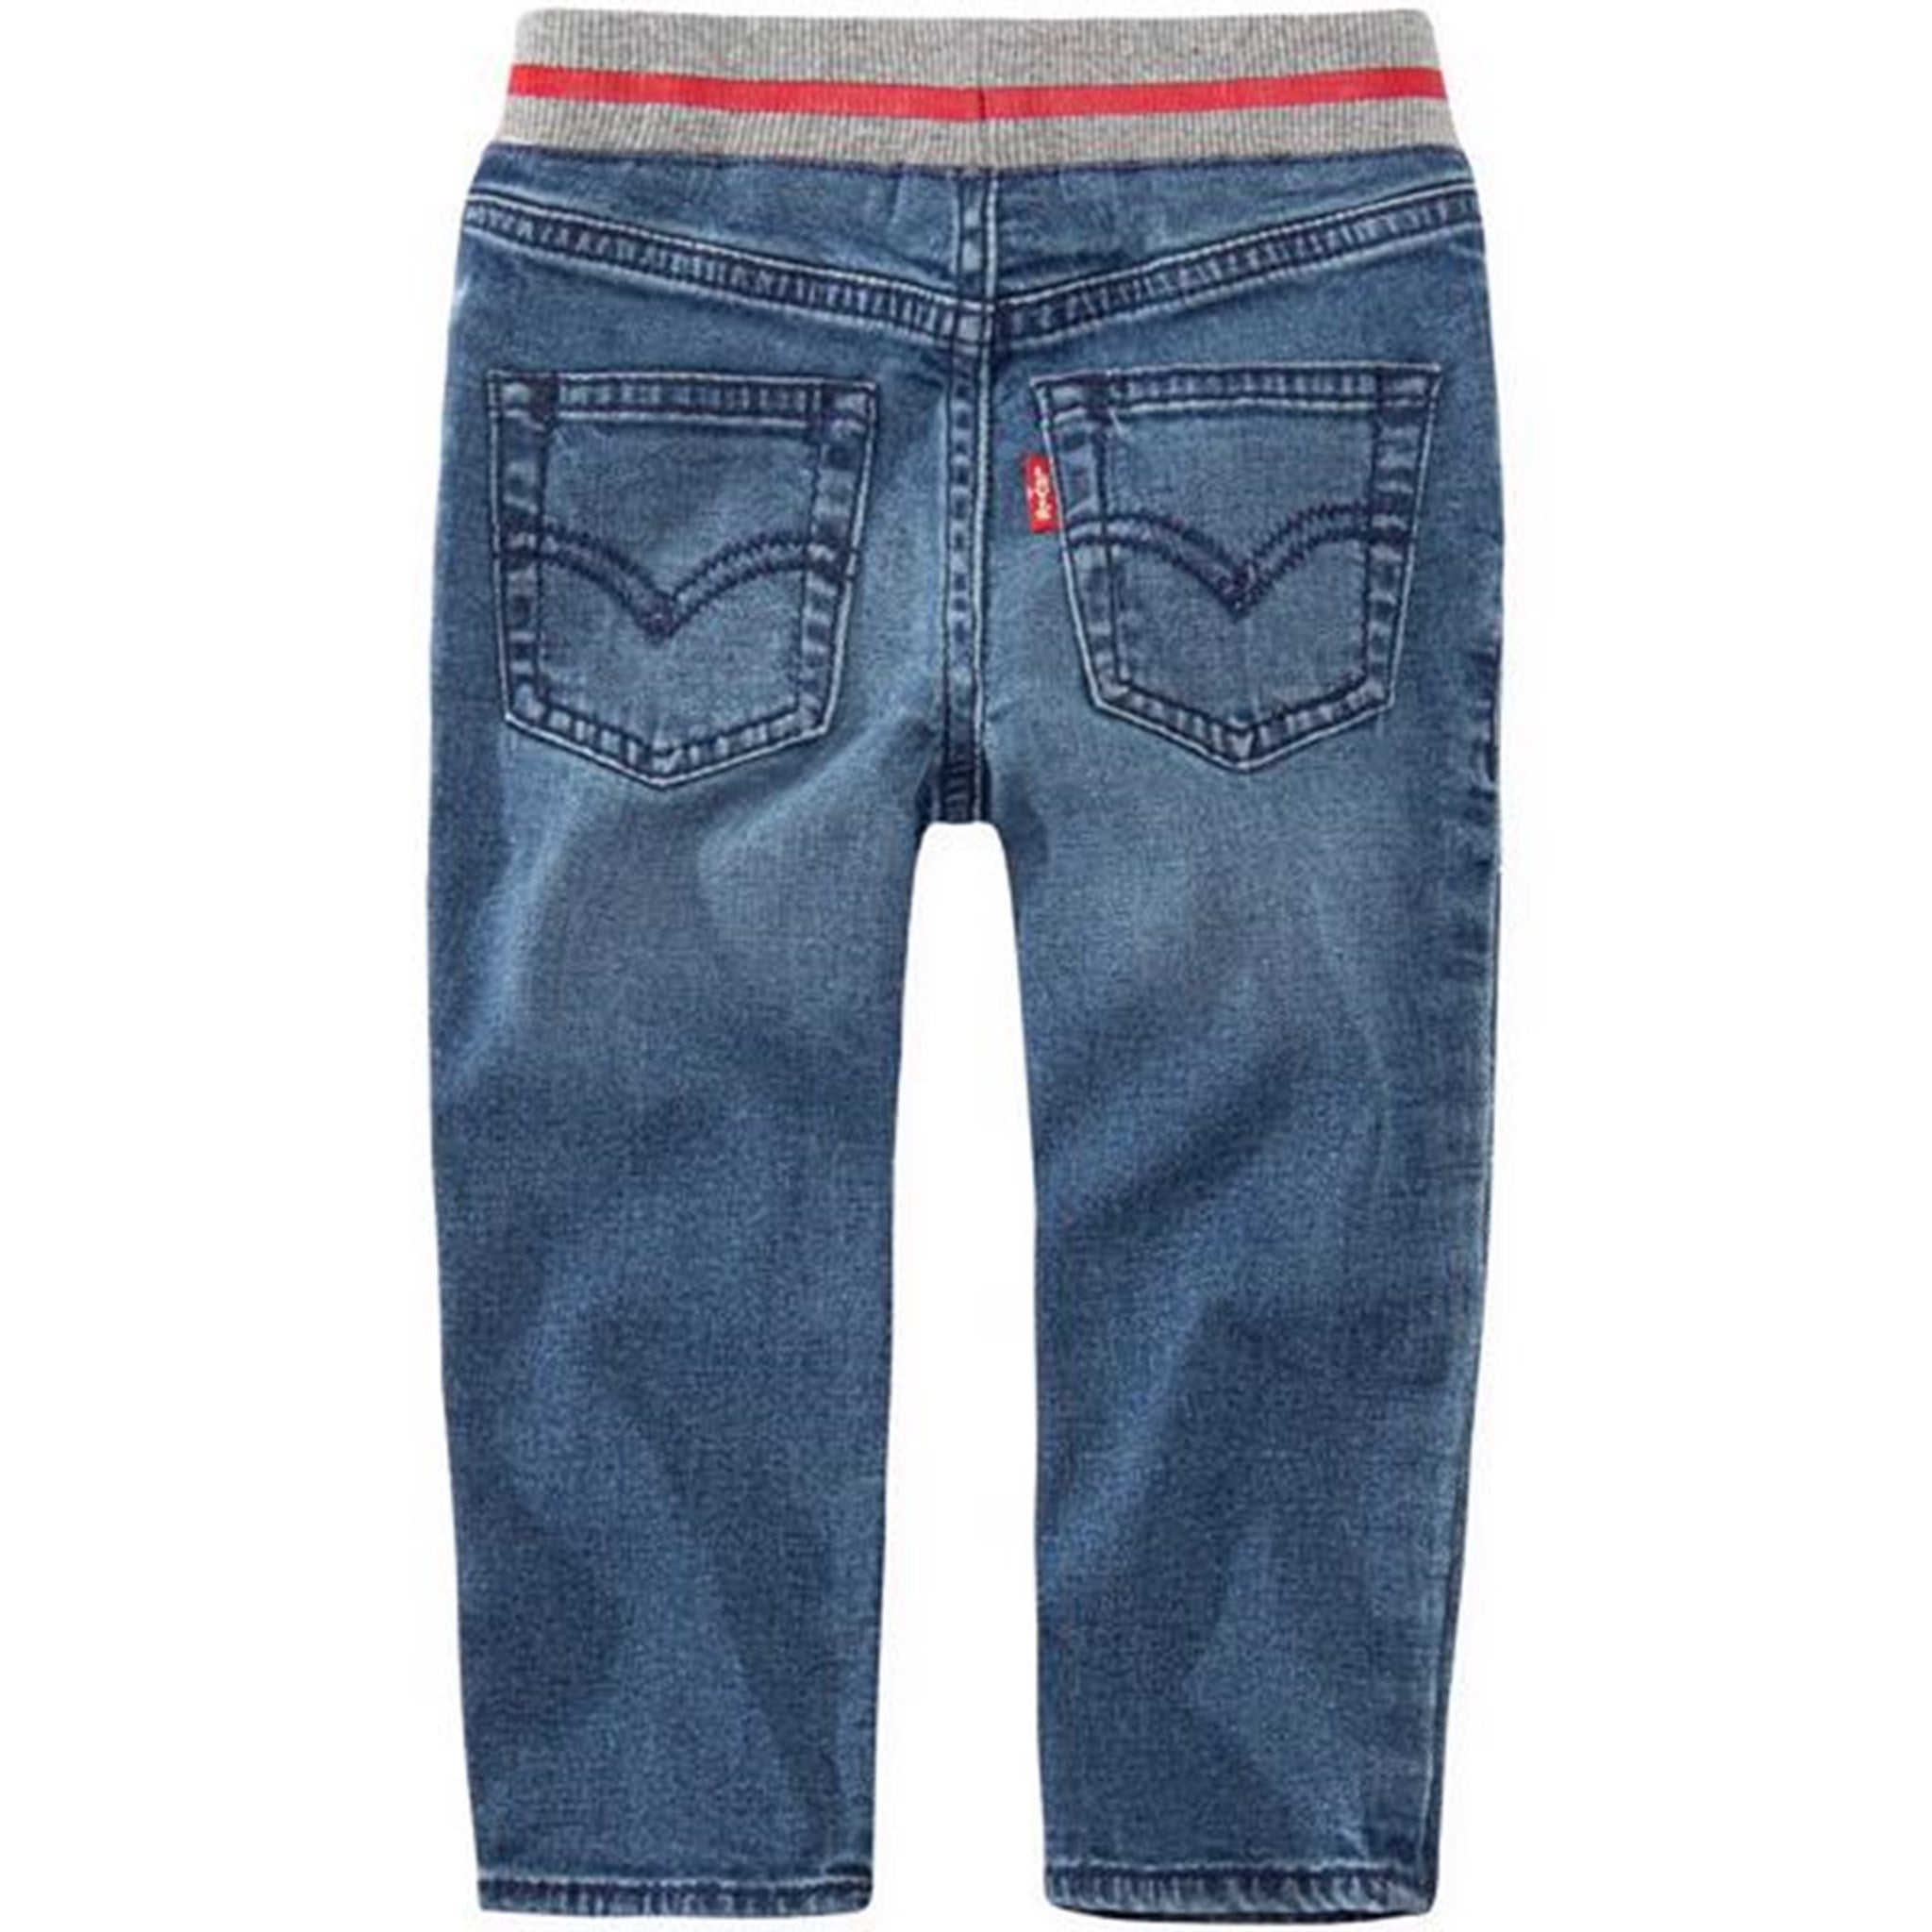 Levis Pull-On Skinny Jeans River Run Pants